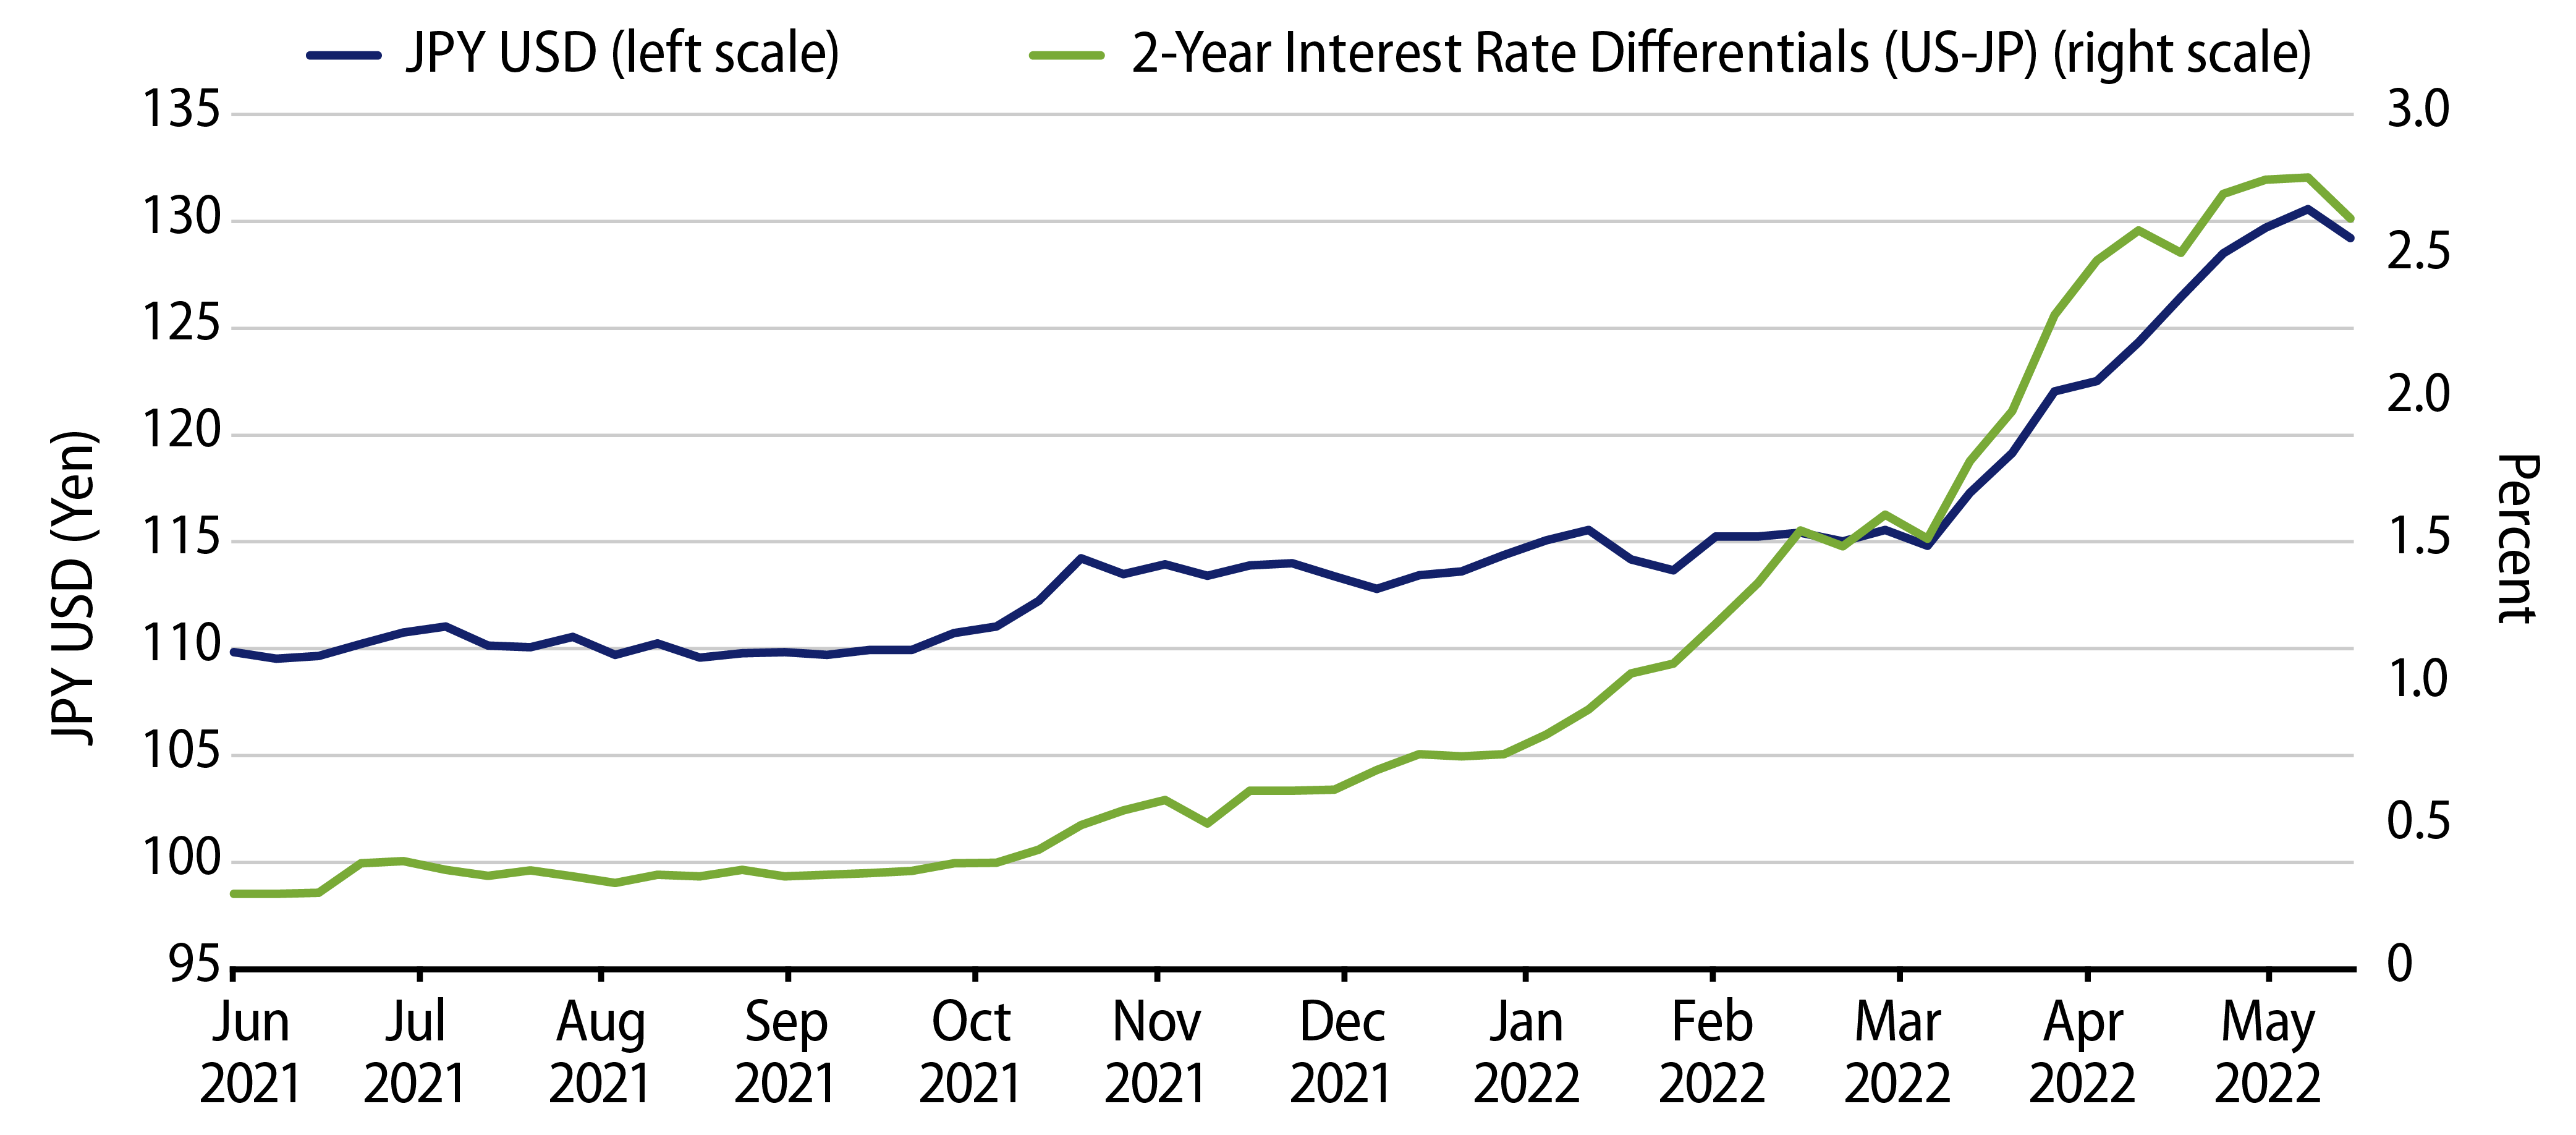 The Decline of the Yen Has Coincided with Widening Interest Rate Gaps Between Japan and the US